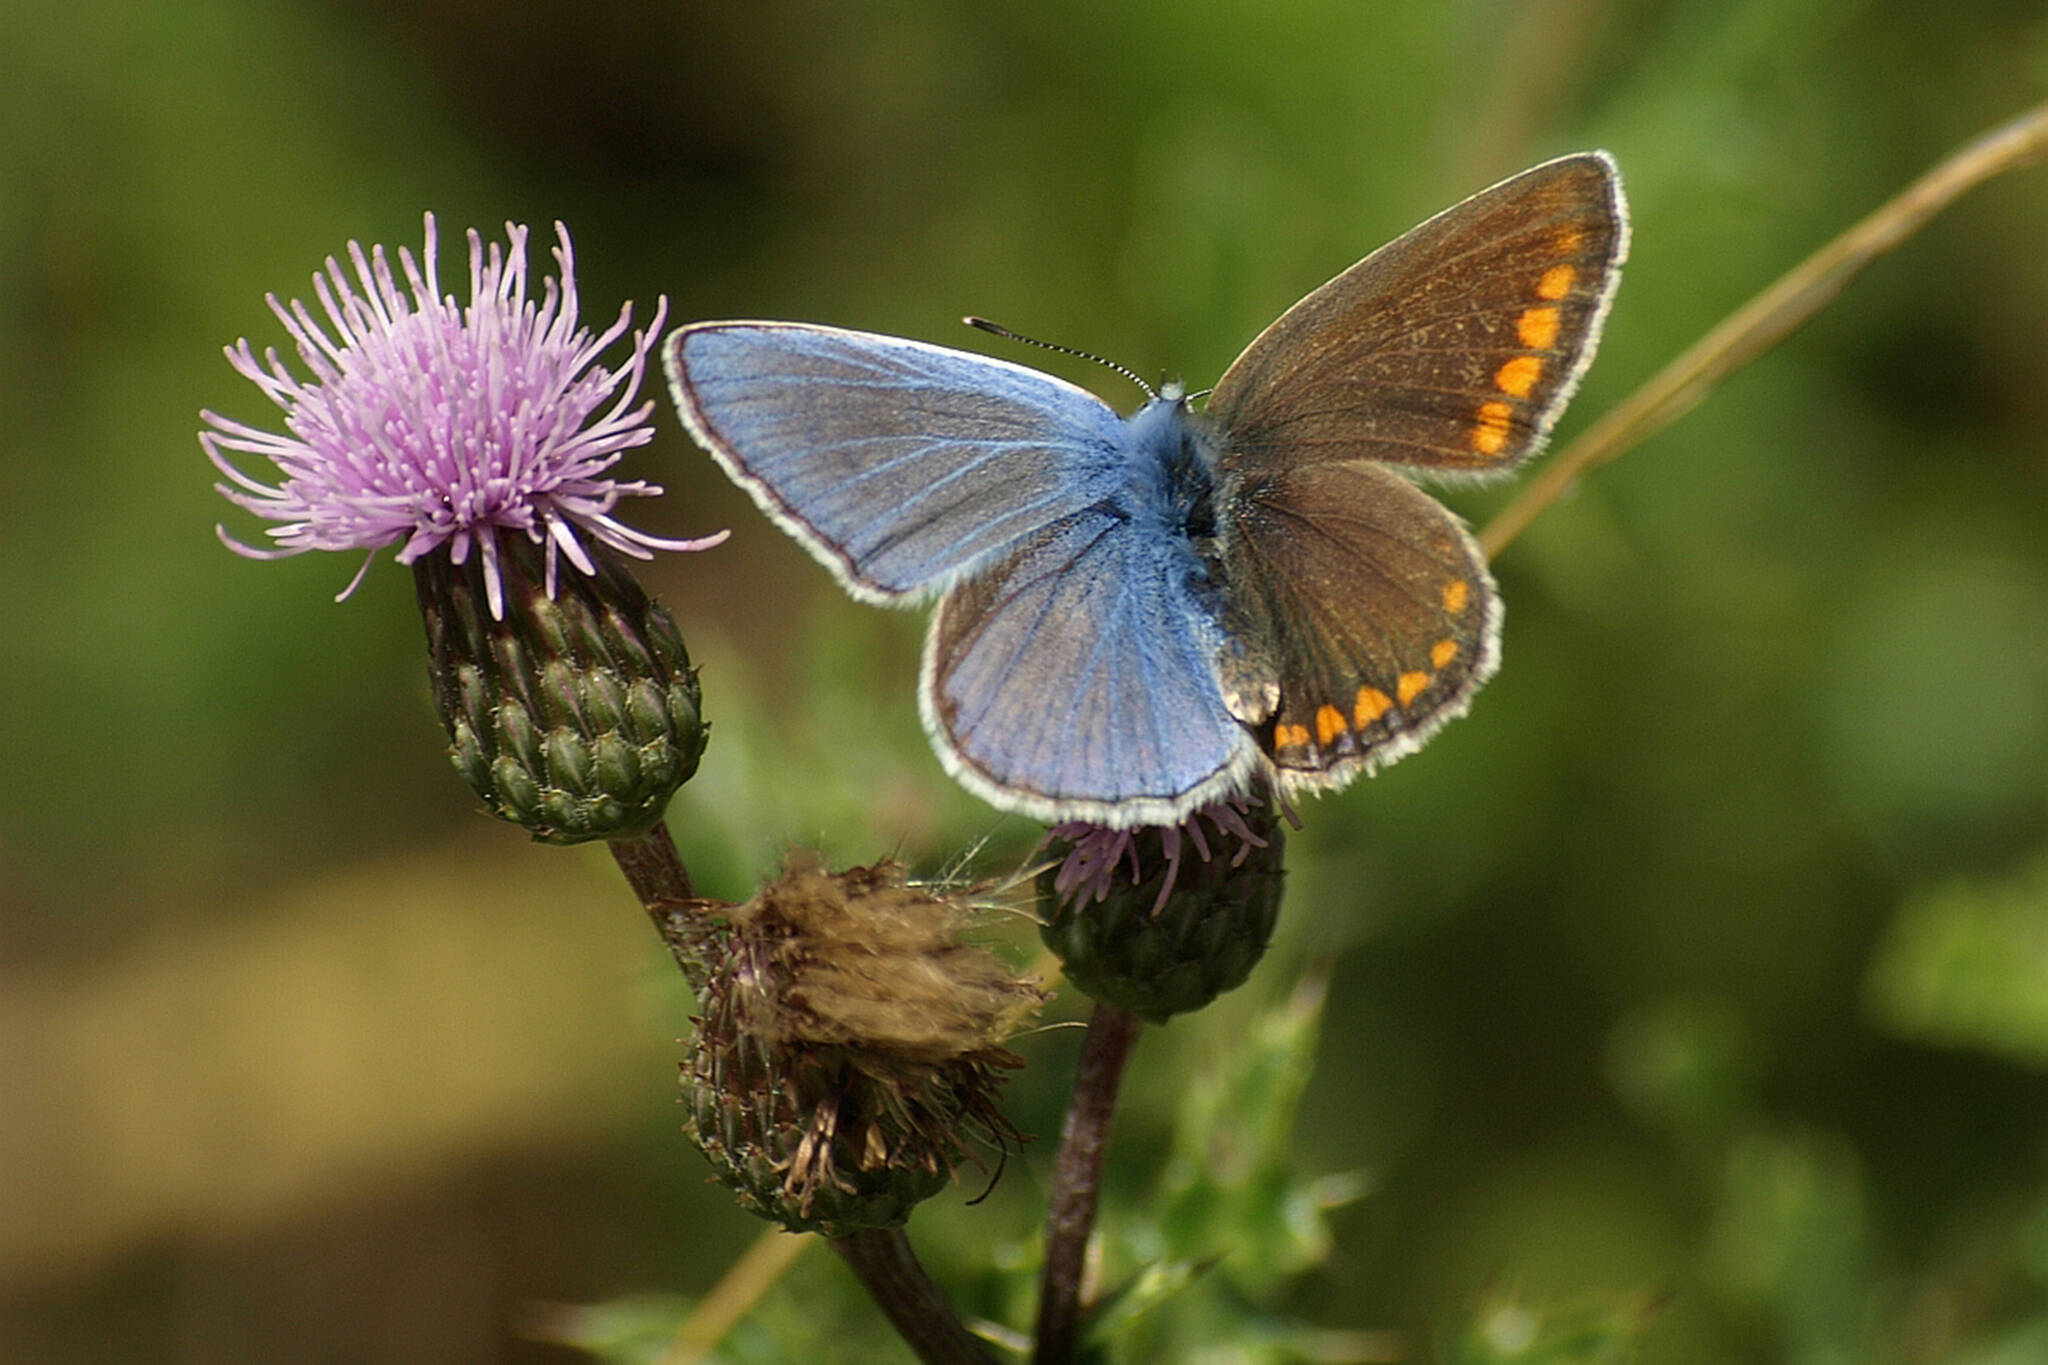 This photo available under the Creative Commons license shows a gynandromorph of a common blue butterfly. Gynandromorphy, meaning female-male-morphology, is well-known, apparently, among birds, including chickens and several songbirds of the eastern U.S.; these individuals have one half with male plumage and the other half with female plumage. They also occur in reptiles, amphibians and fishes (as well as a variety of insects and other invertebrates.) (Courtesy Photo / Burkhard Hinnersmann)